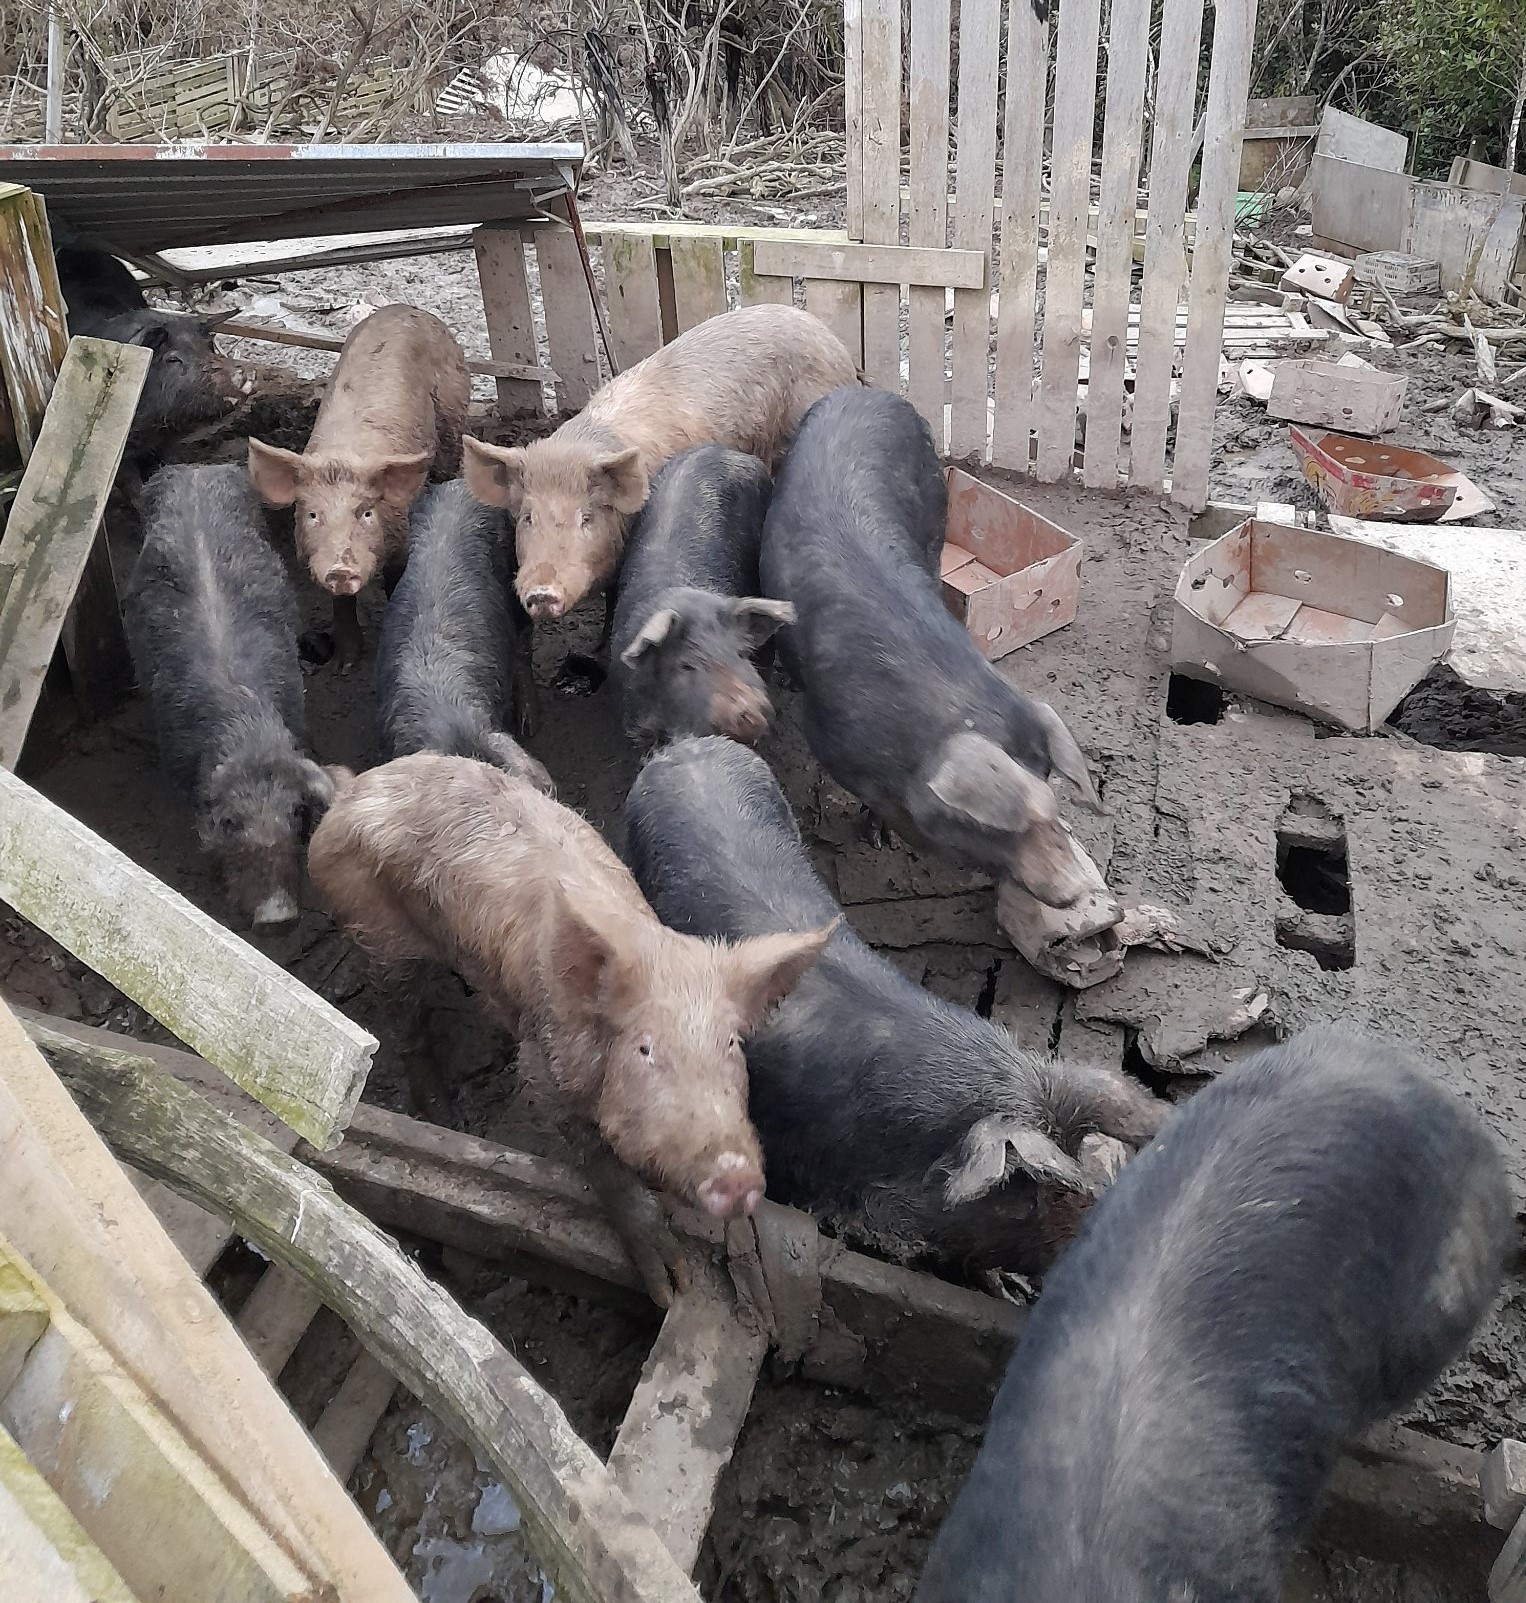 Emaciated pigs found by Wellington SPCA desperately need homes - NZ Herald